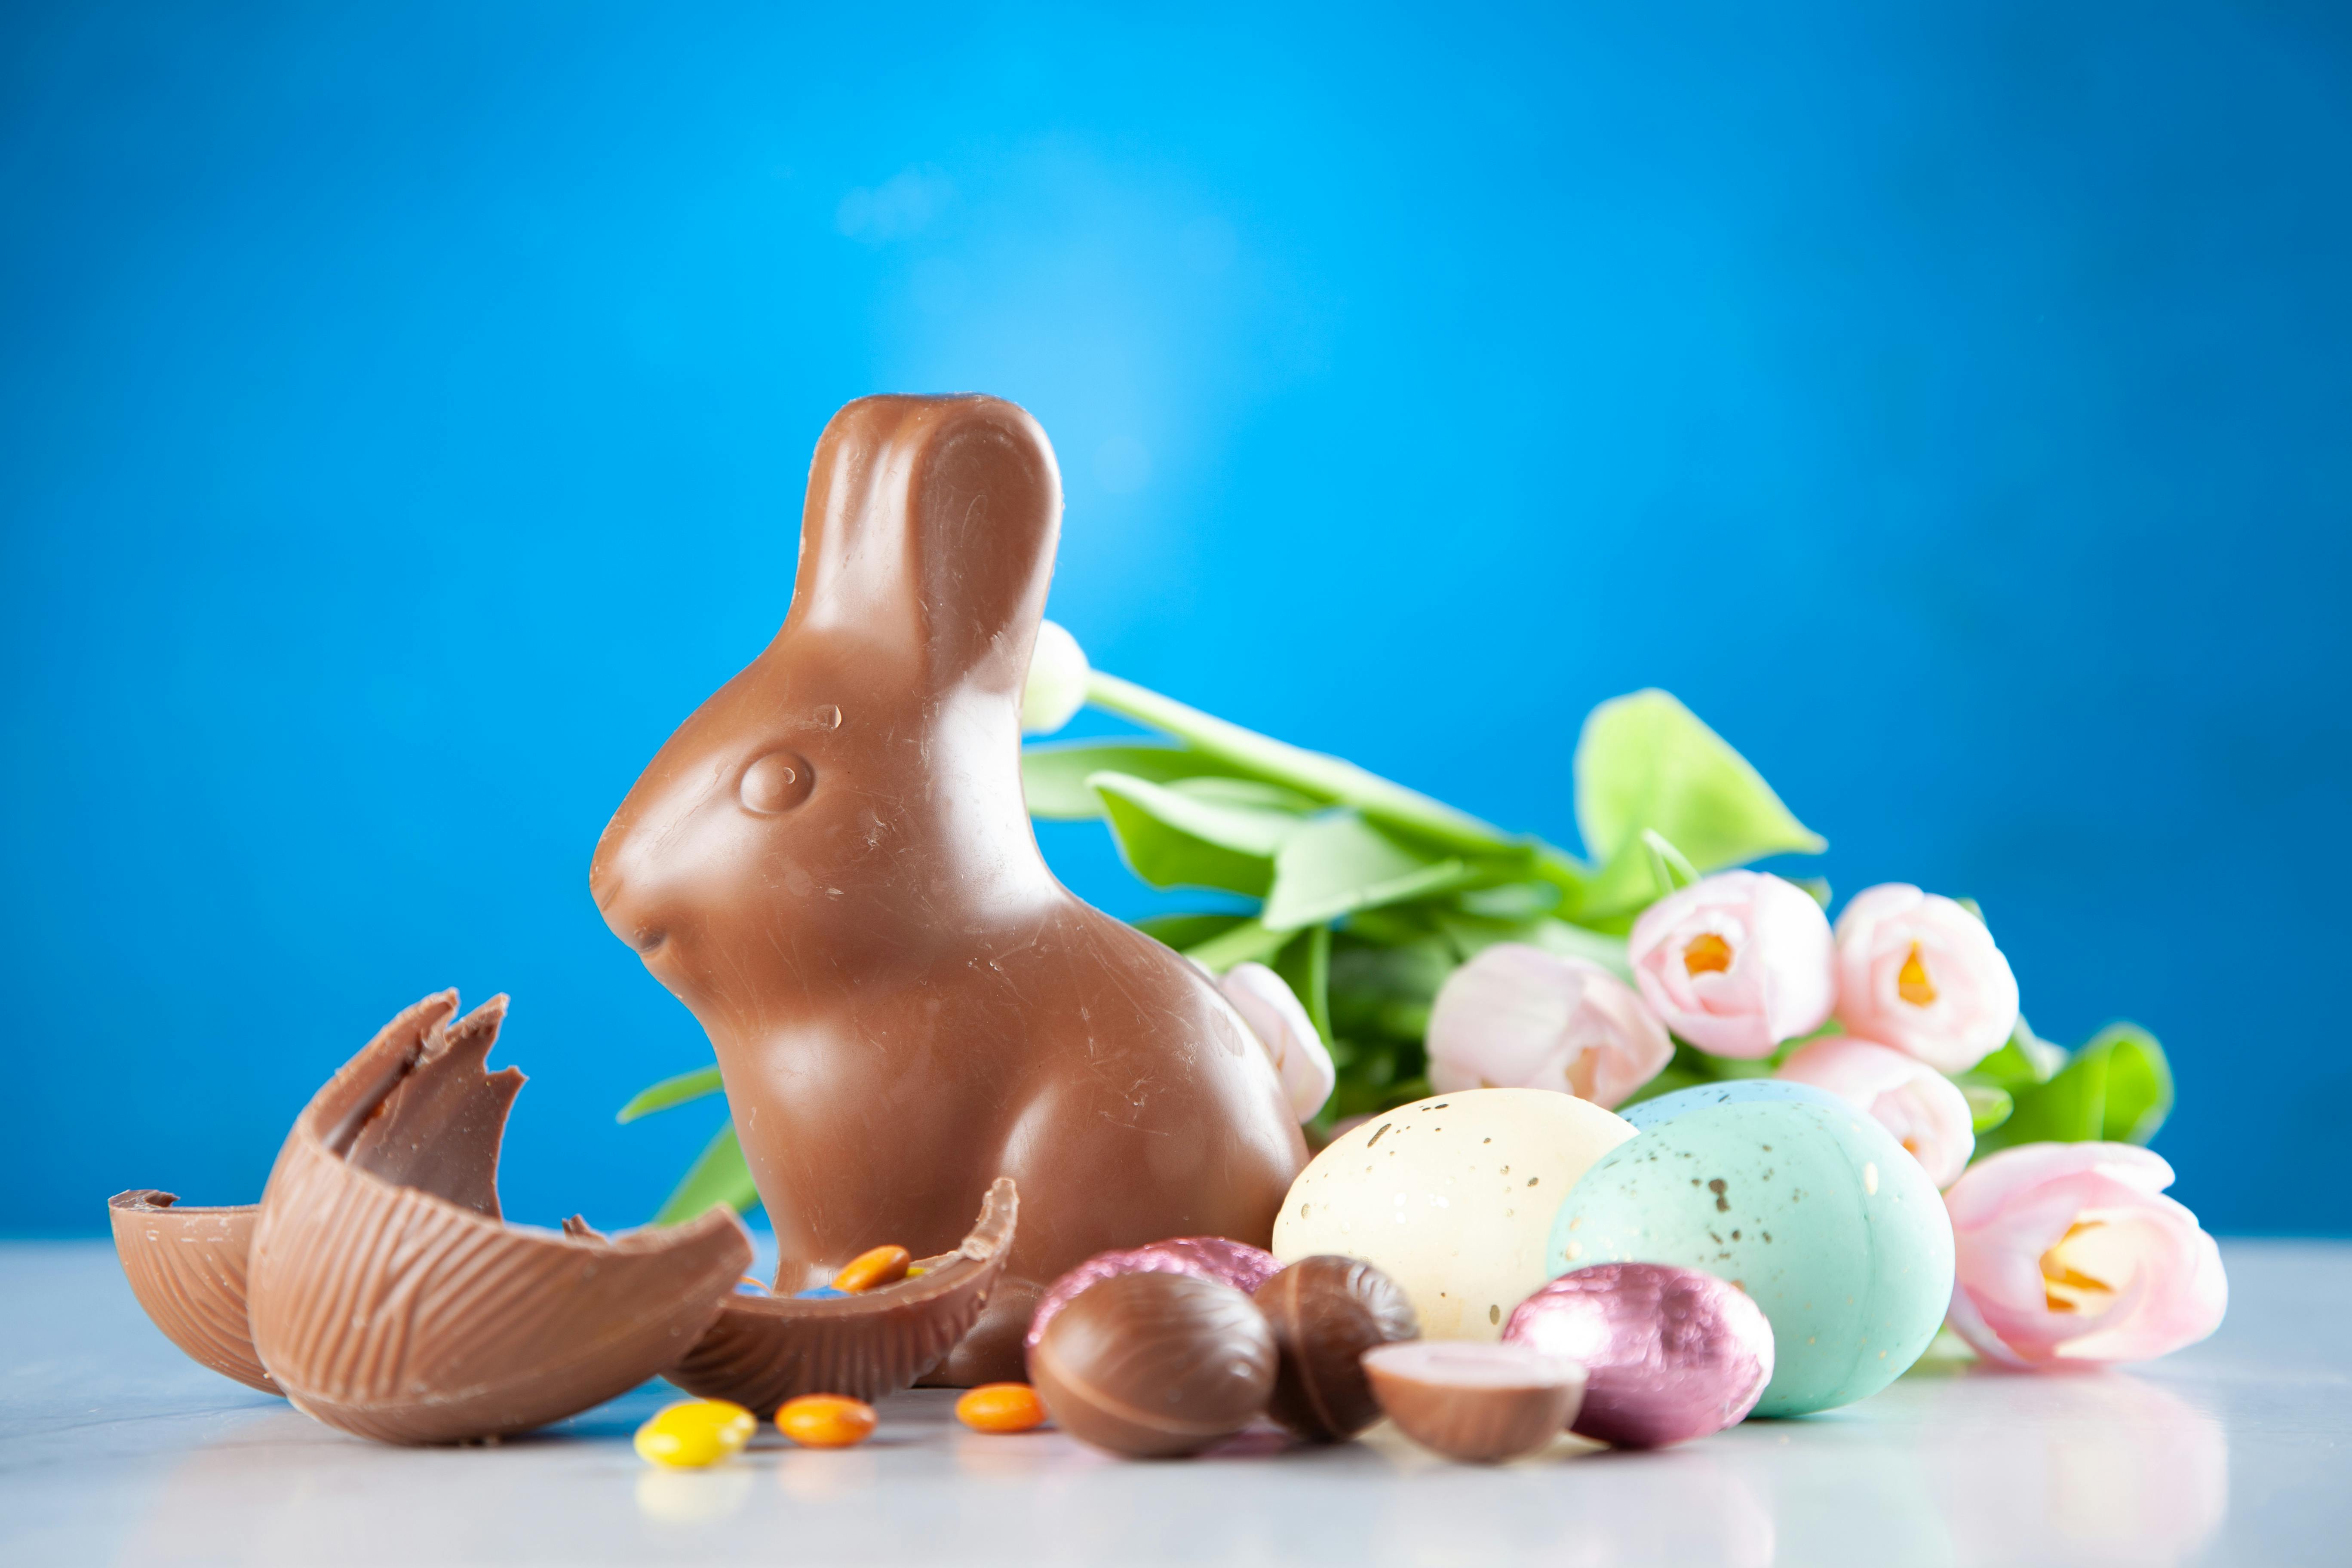 Hop to It! The Ultimate 2024 Easter Gift Guide for Everybunny in Your Nest!